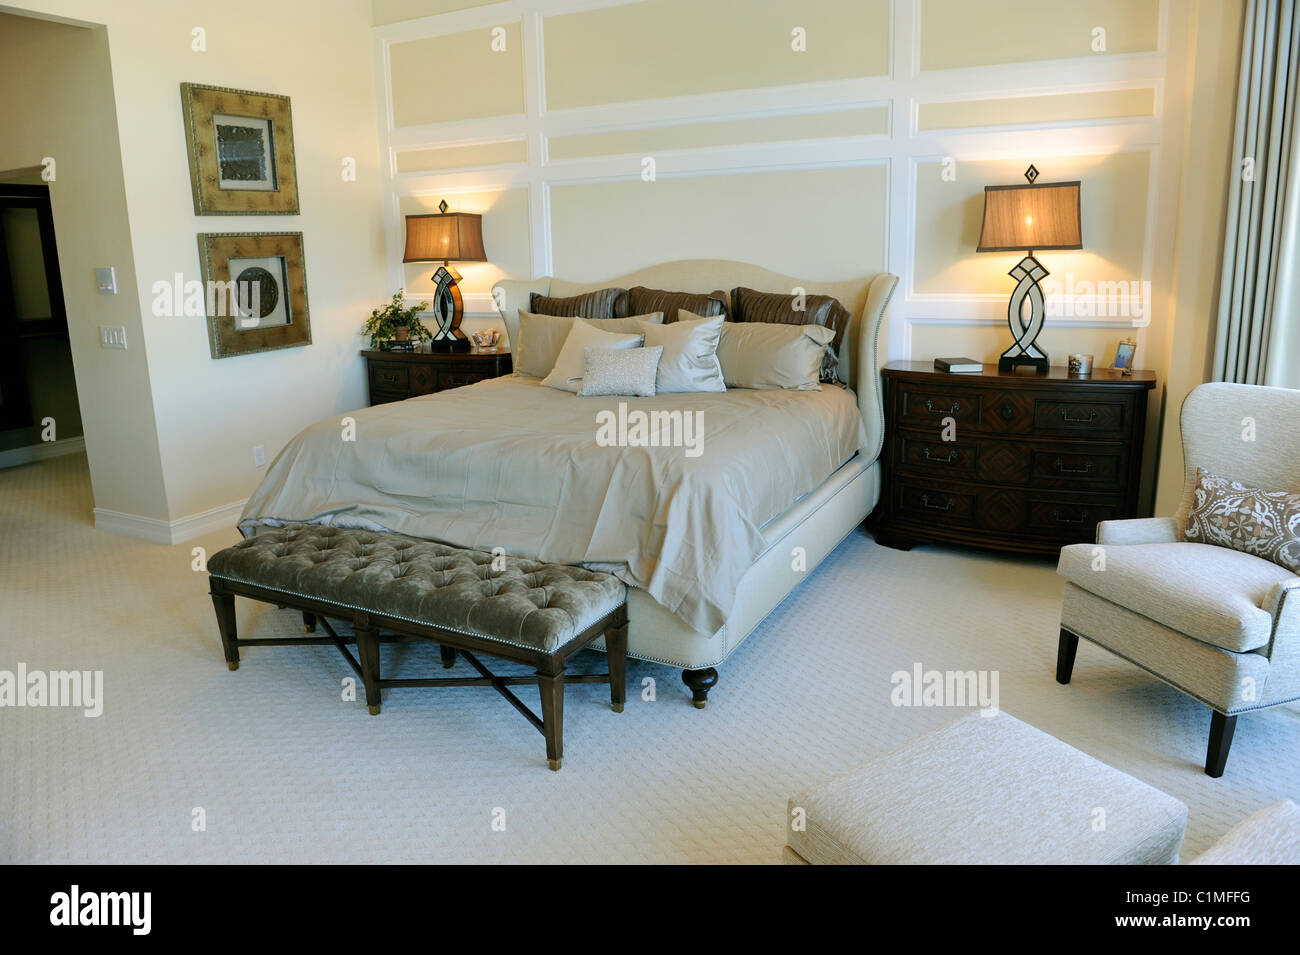 Interior spacious modern bedroom of an upscale new home construction Tampa Florida Stock Photo